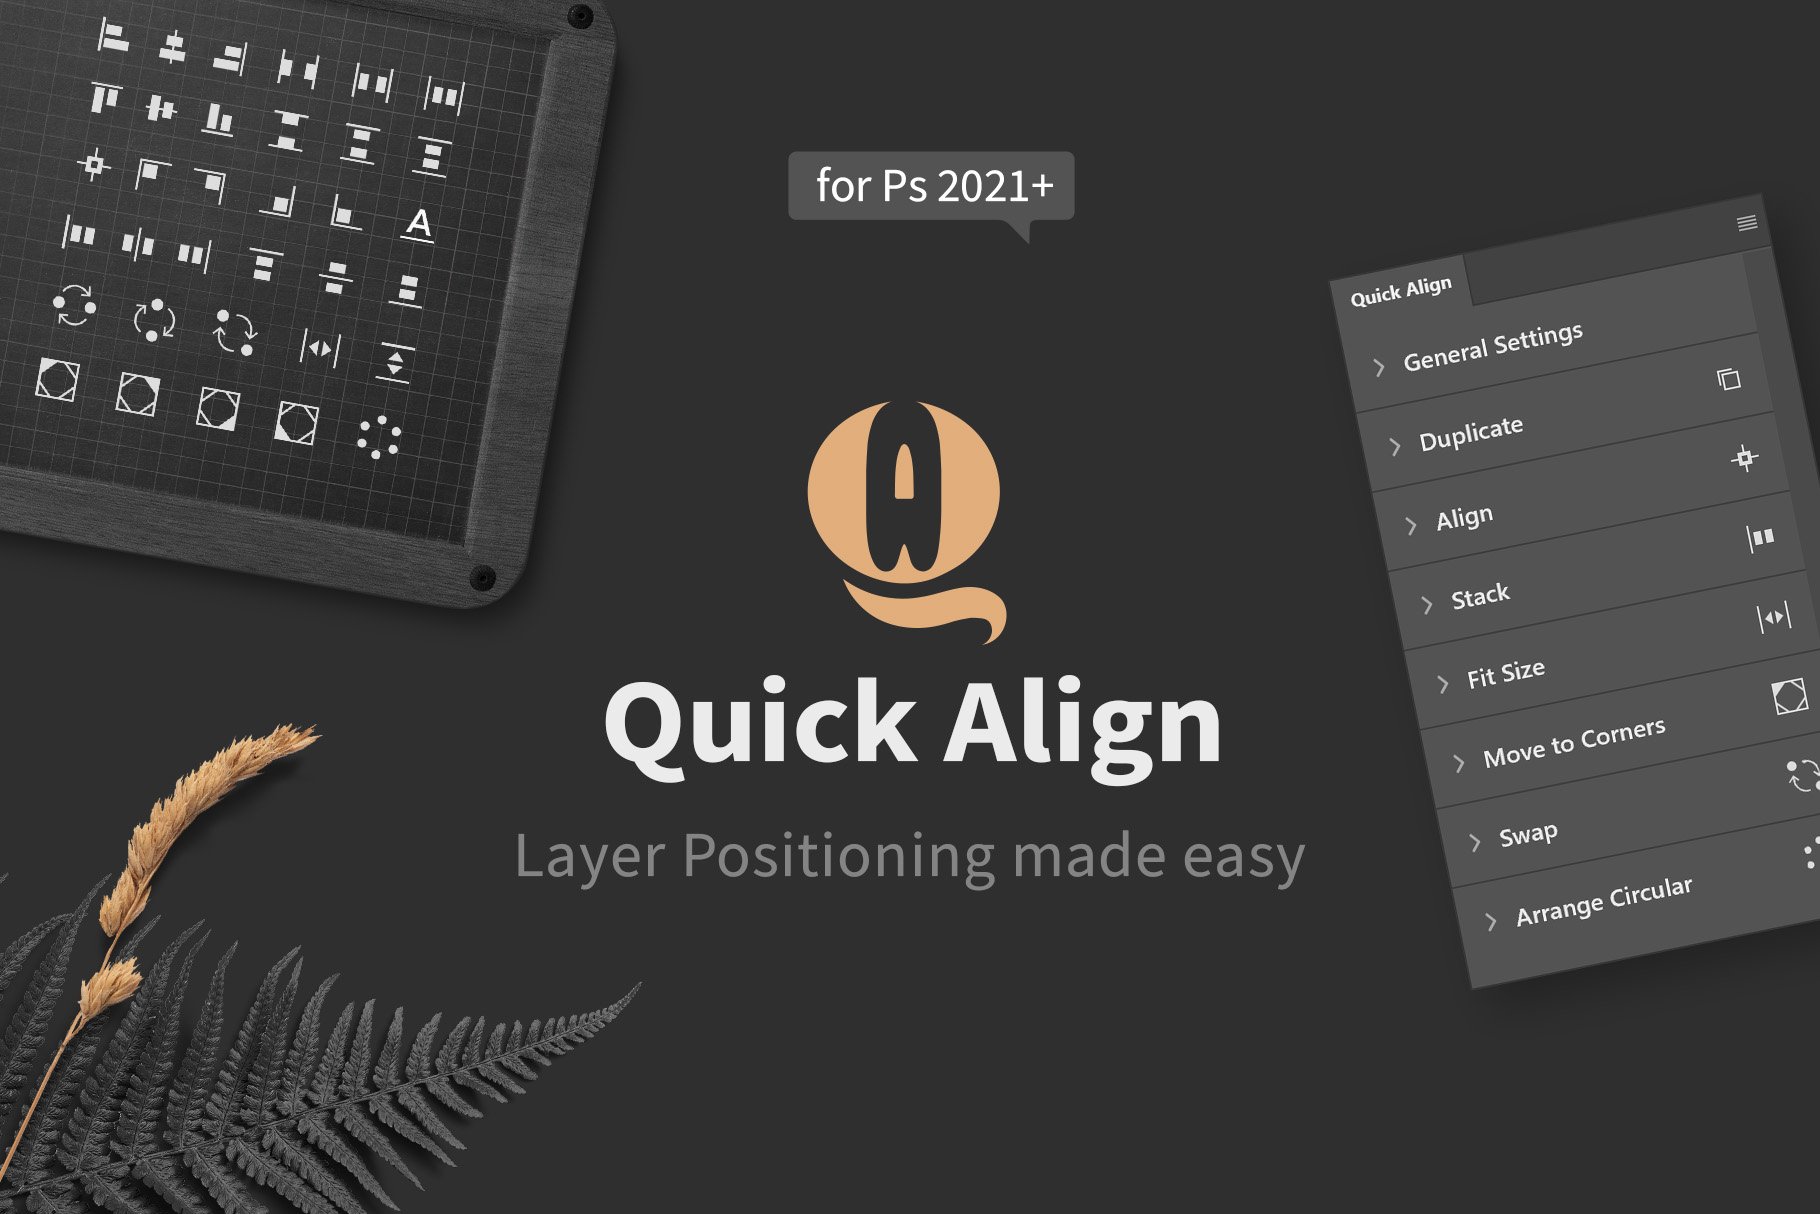 Quick Align - Easy Layer Positioningcover image.